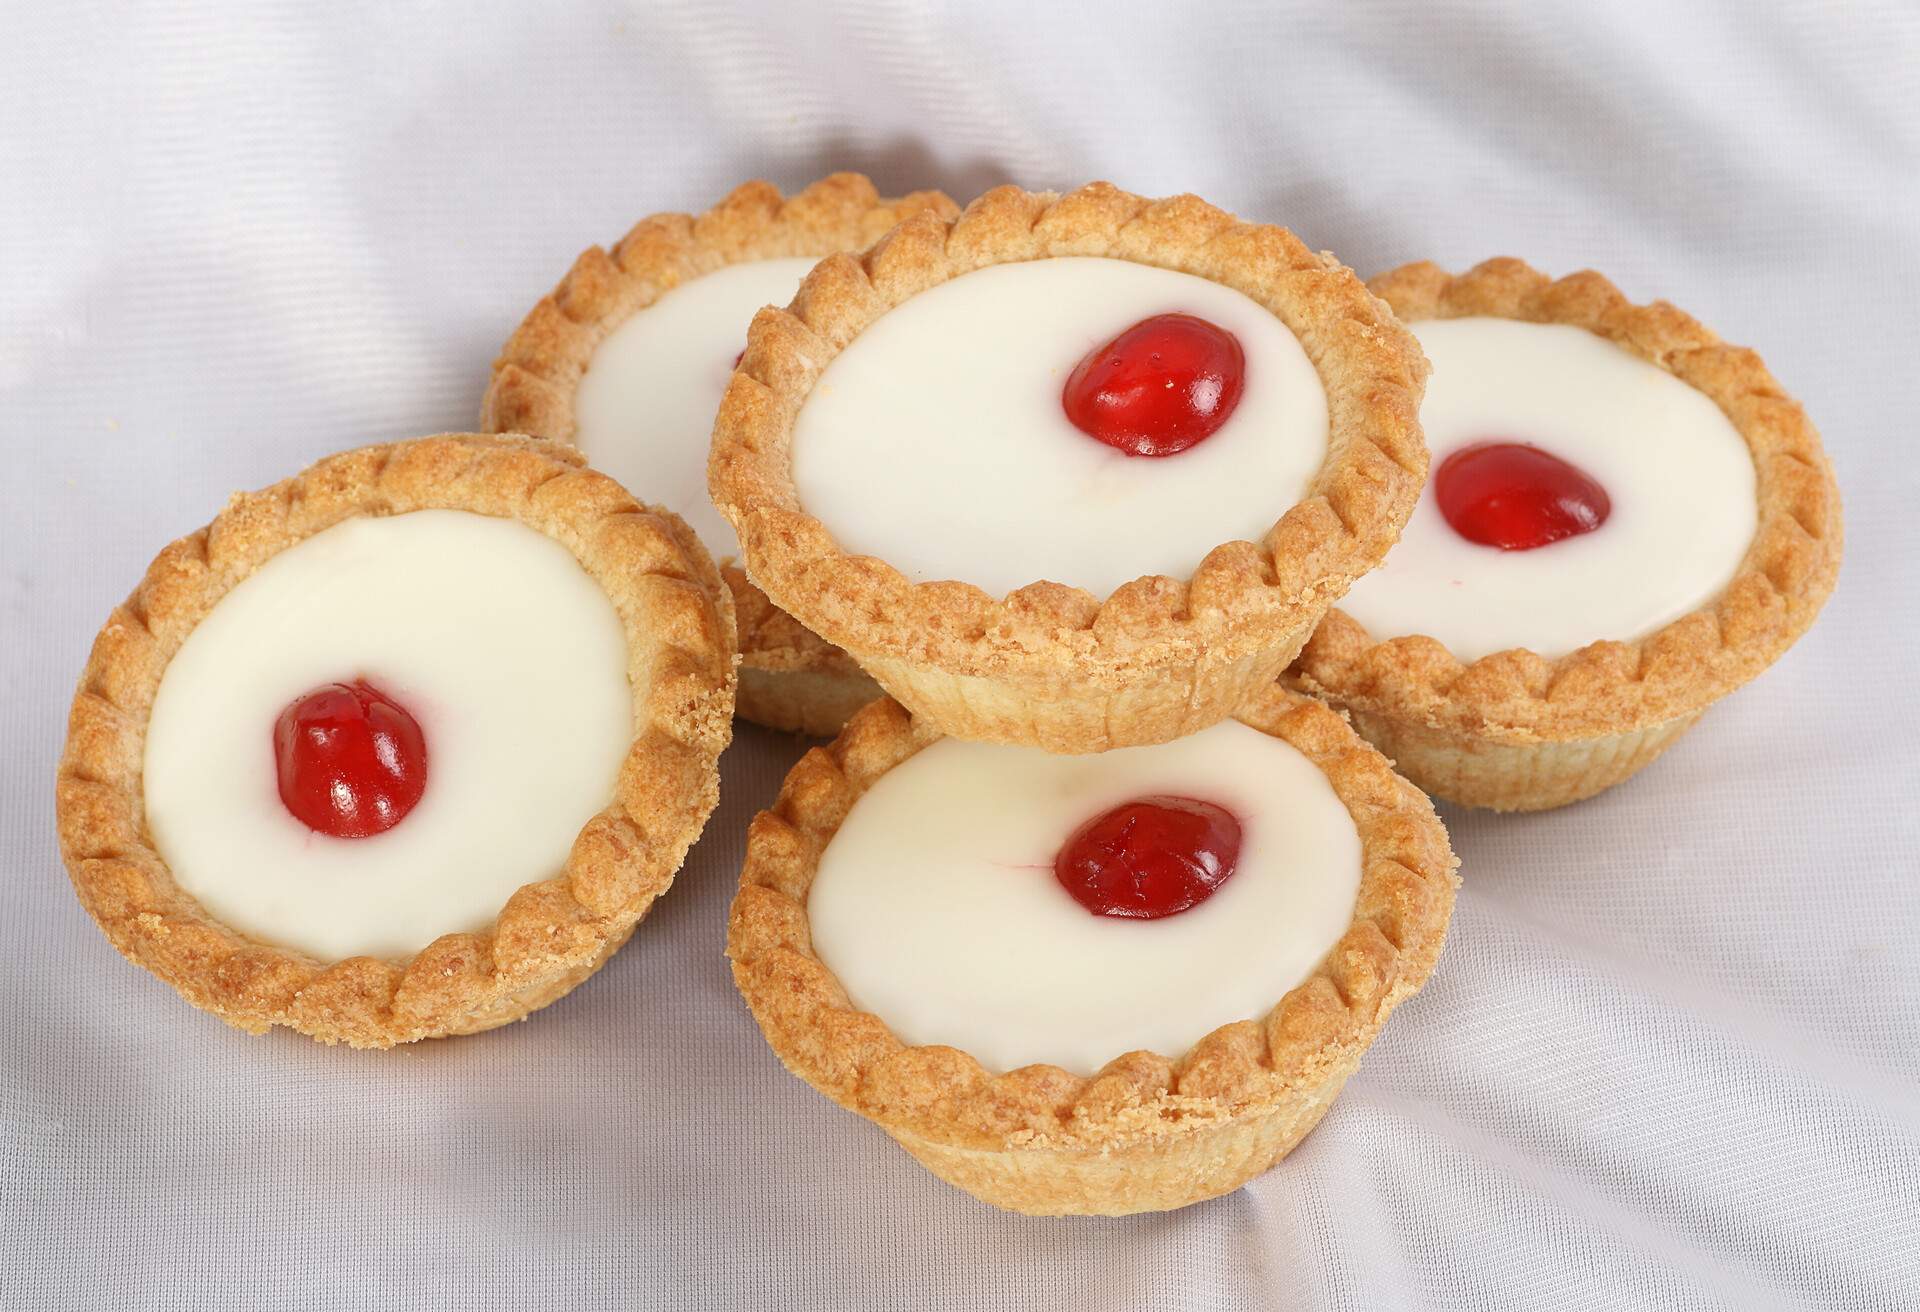 five cherry bakewell cakes on a white cloth